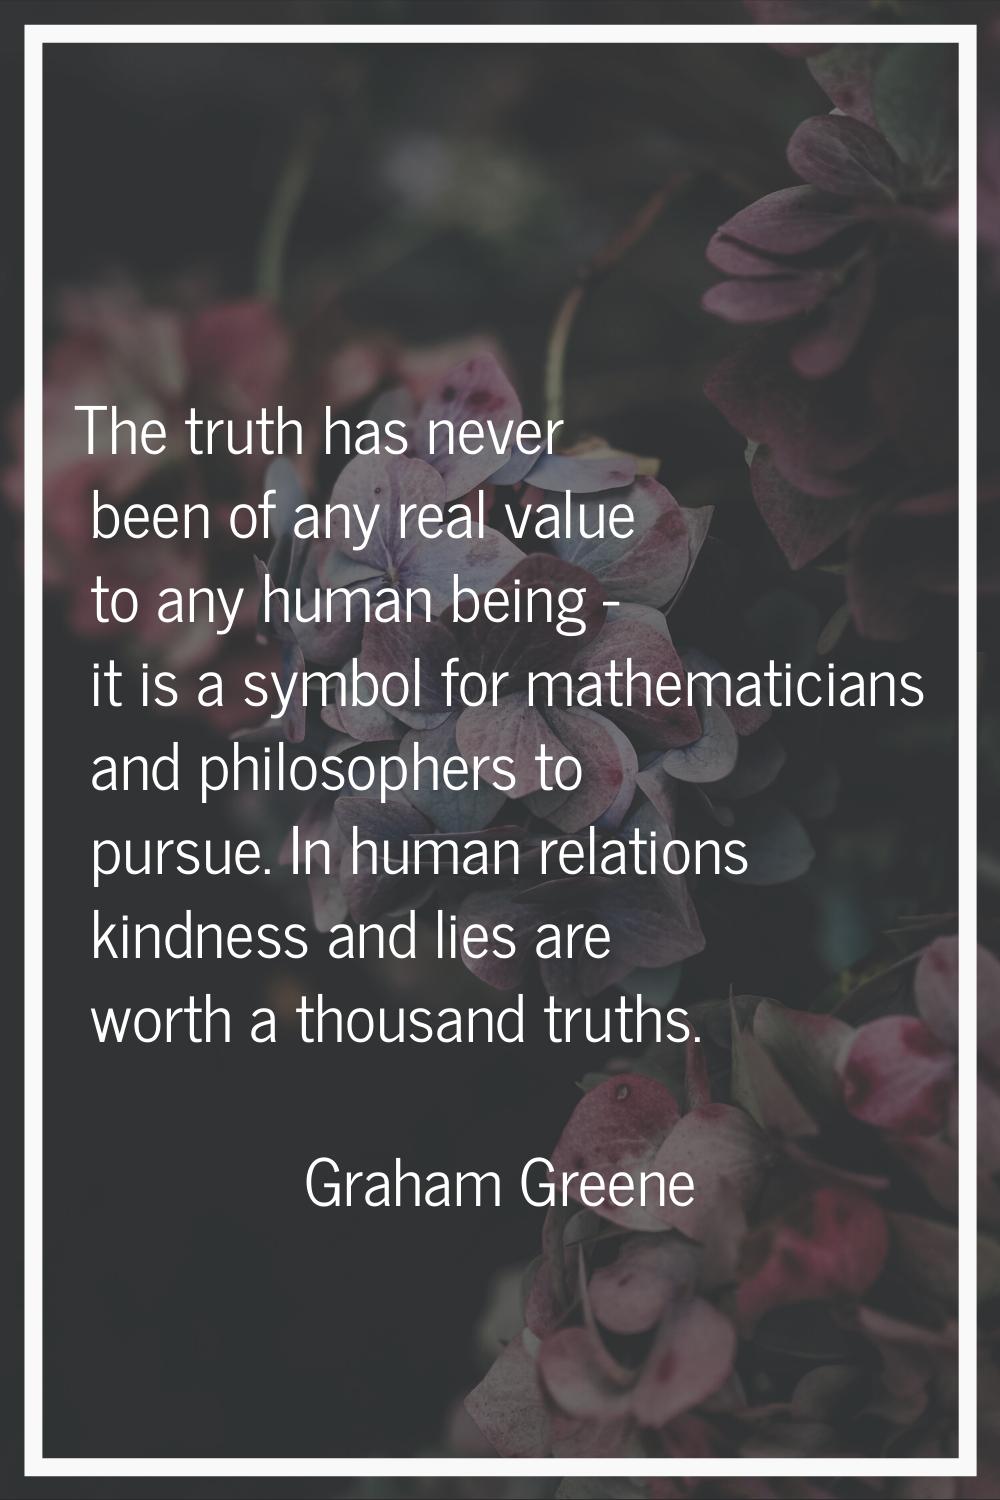 The truth has never been of any real value to any human being - it is a symbol for mathematicians a